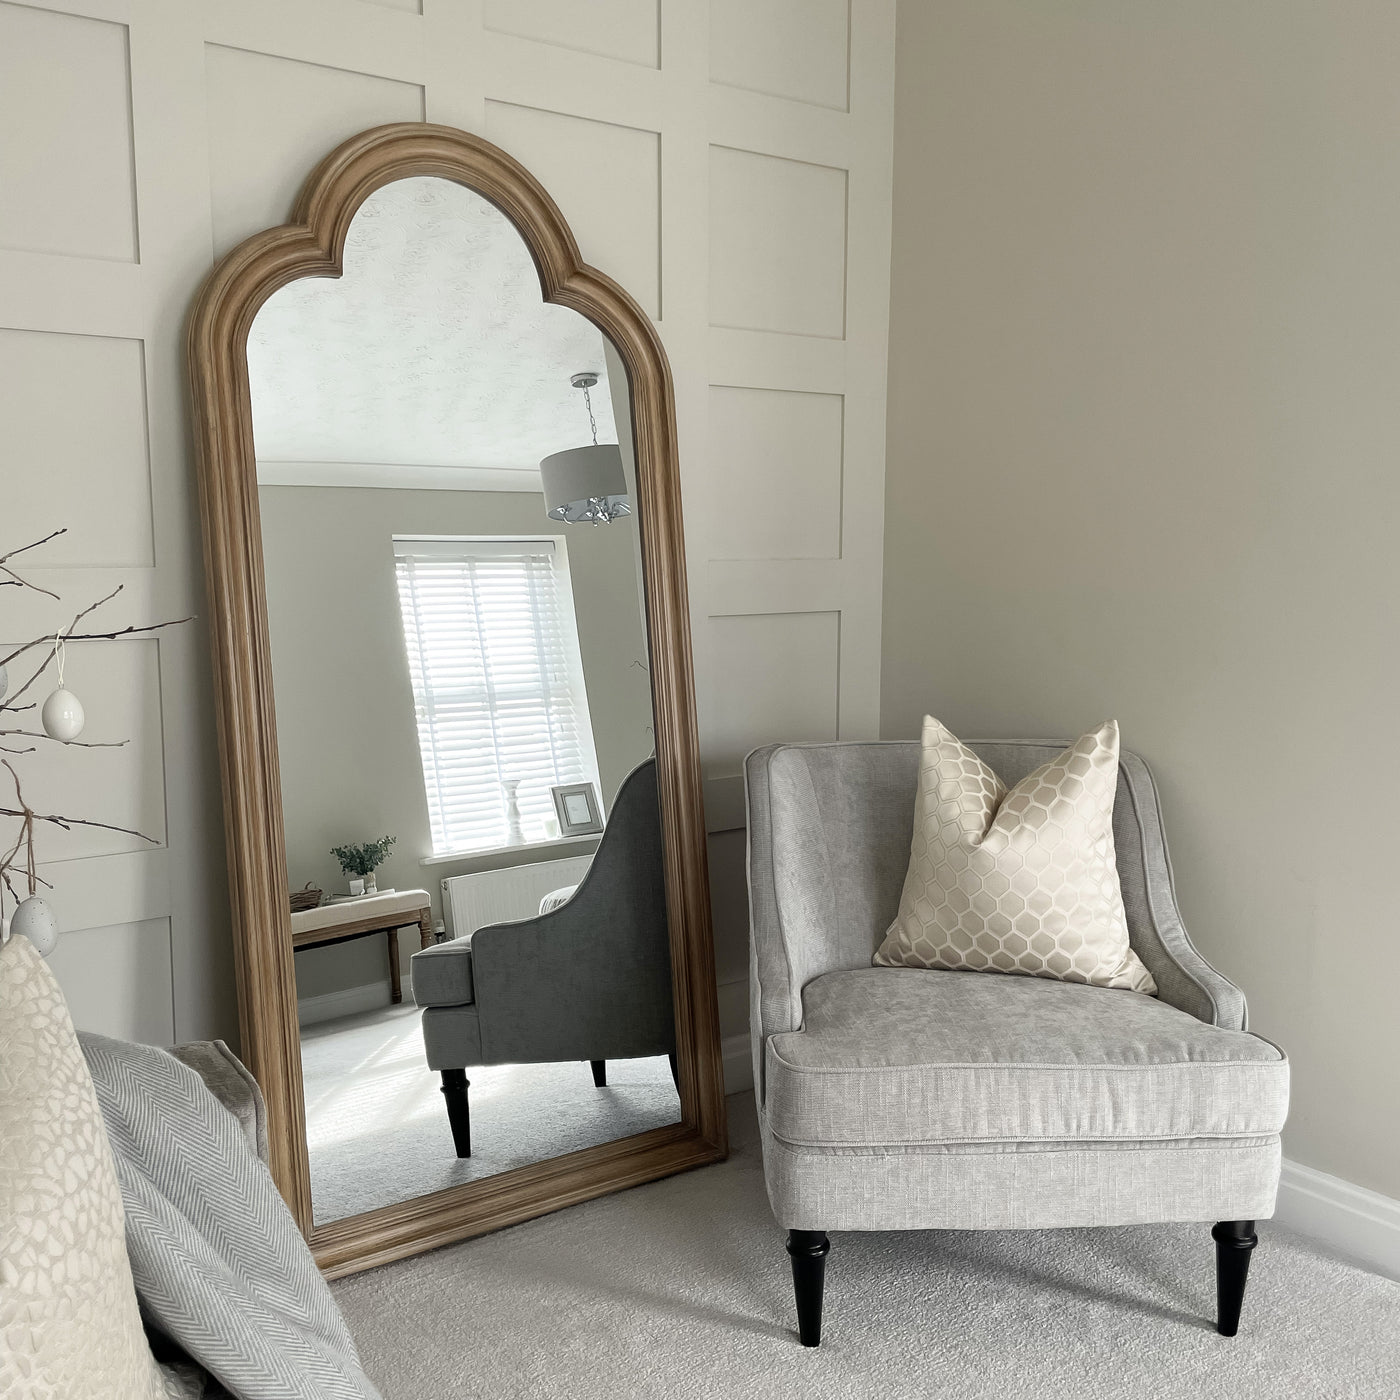 Washed Wood Arched Full Length Mirror leaning against wall